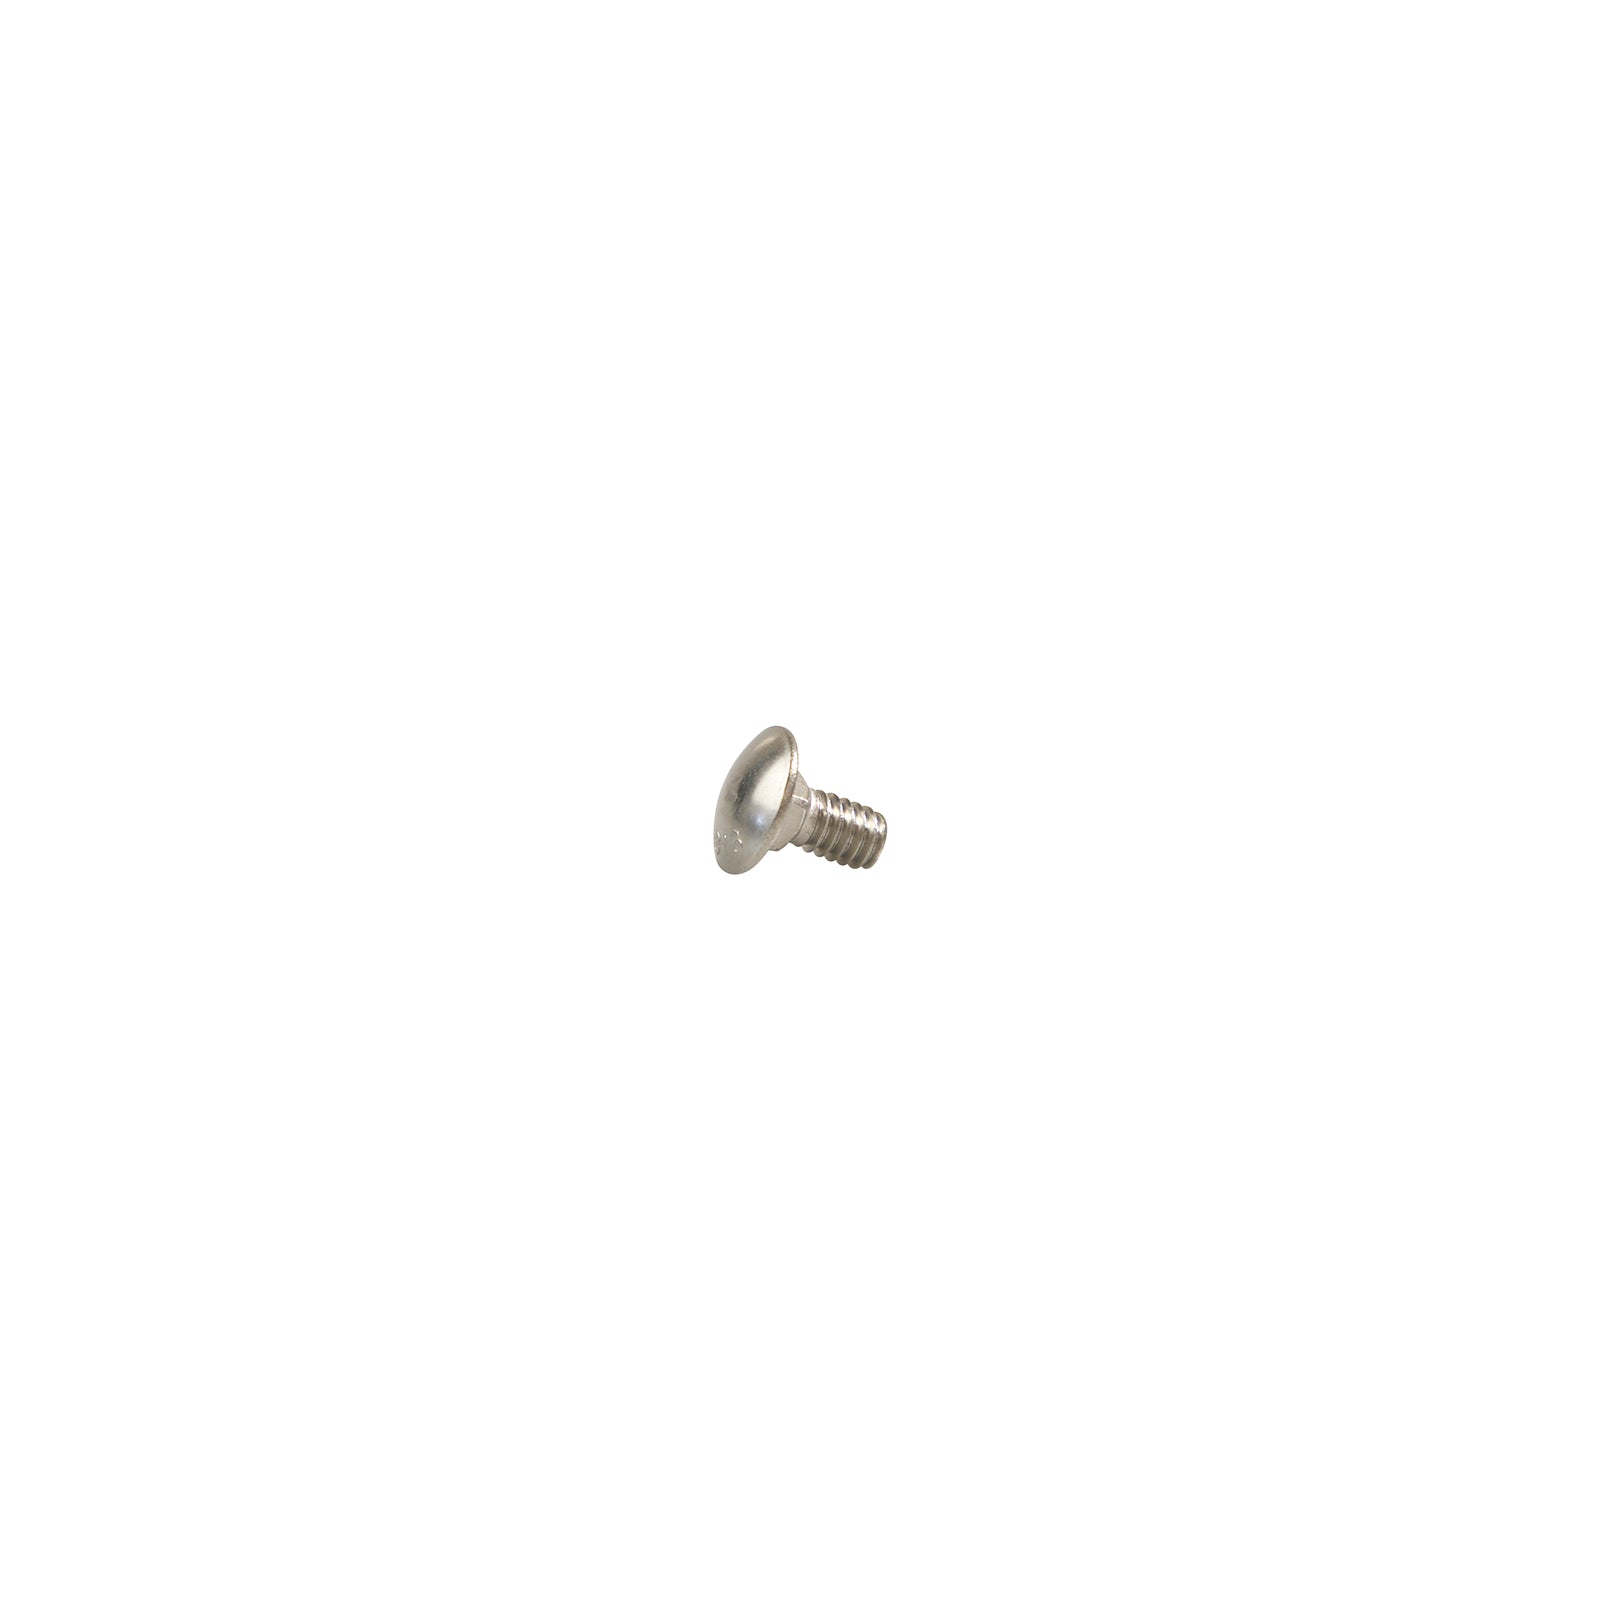 1/4"-20 x 1/2" Conquest Carriage Bolt - 316 Stainless Steel